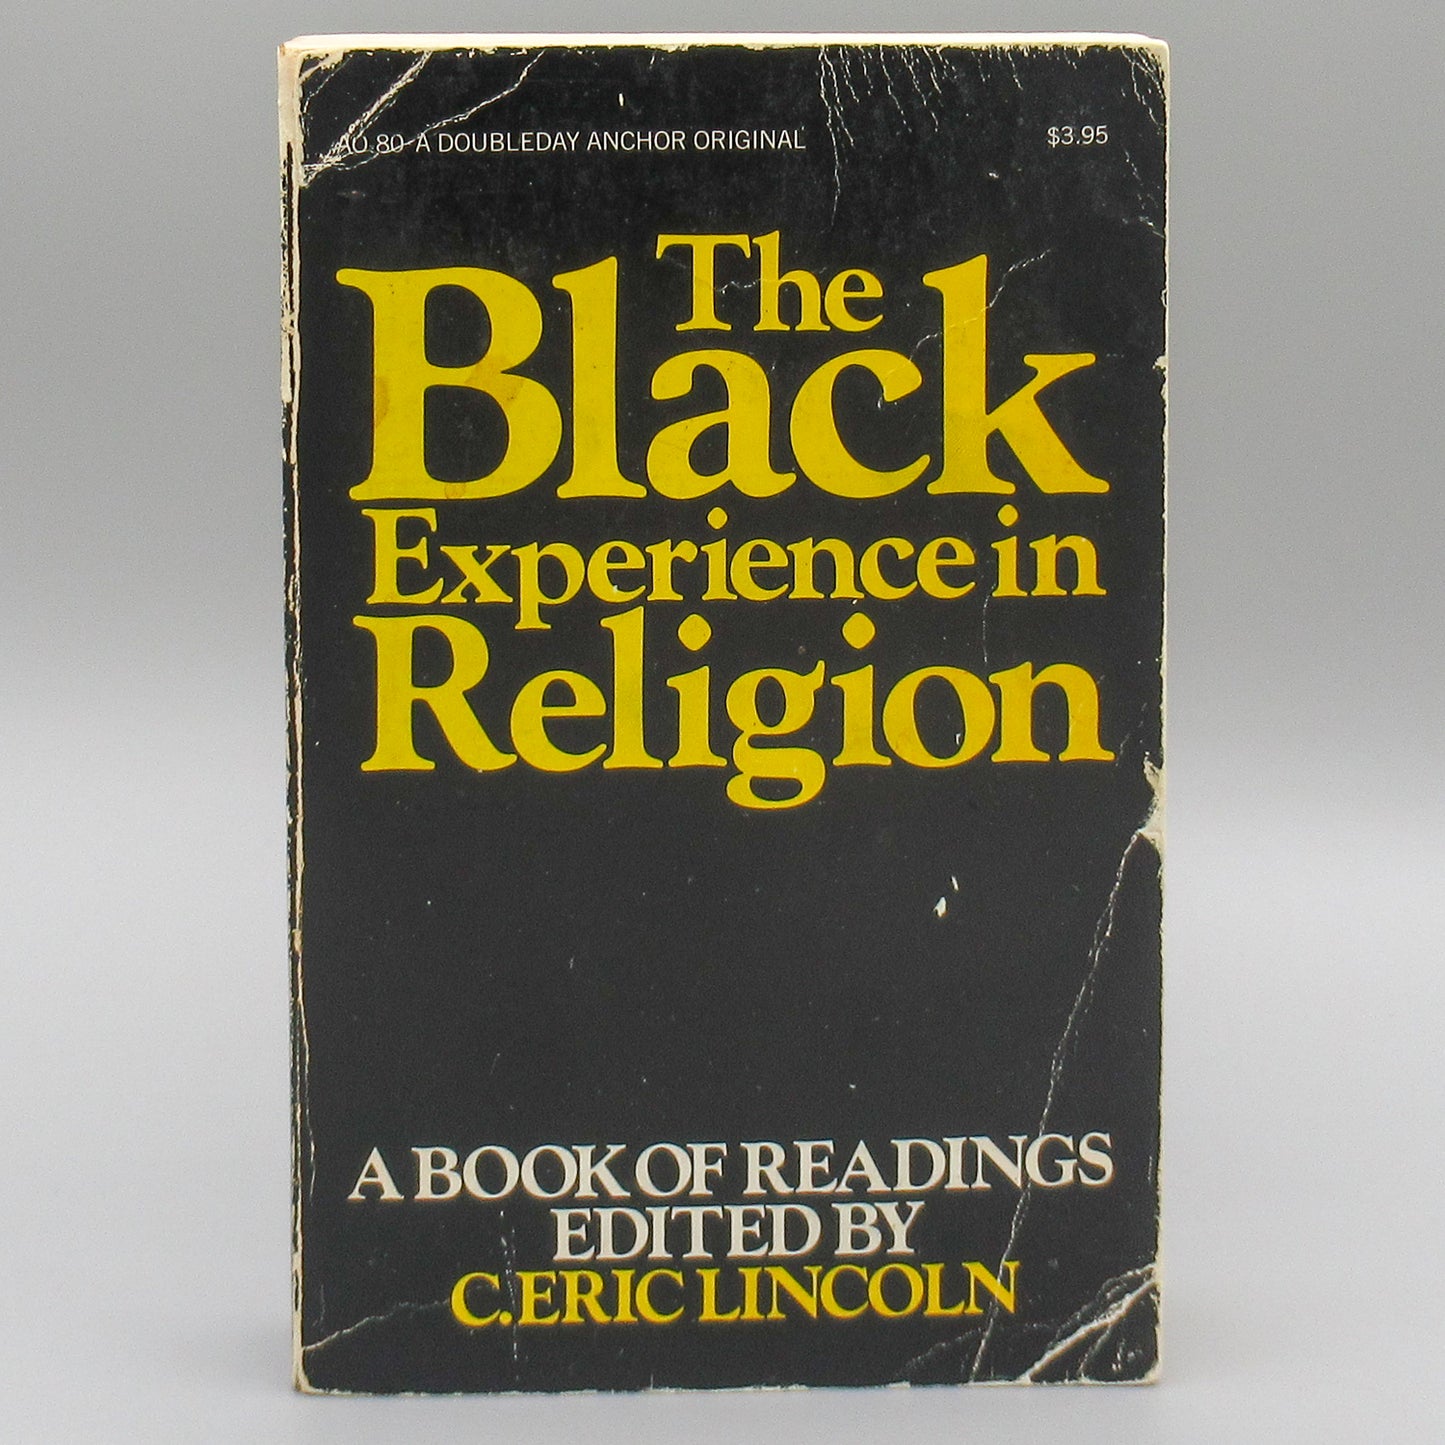 The Black Experience in Religion